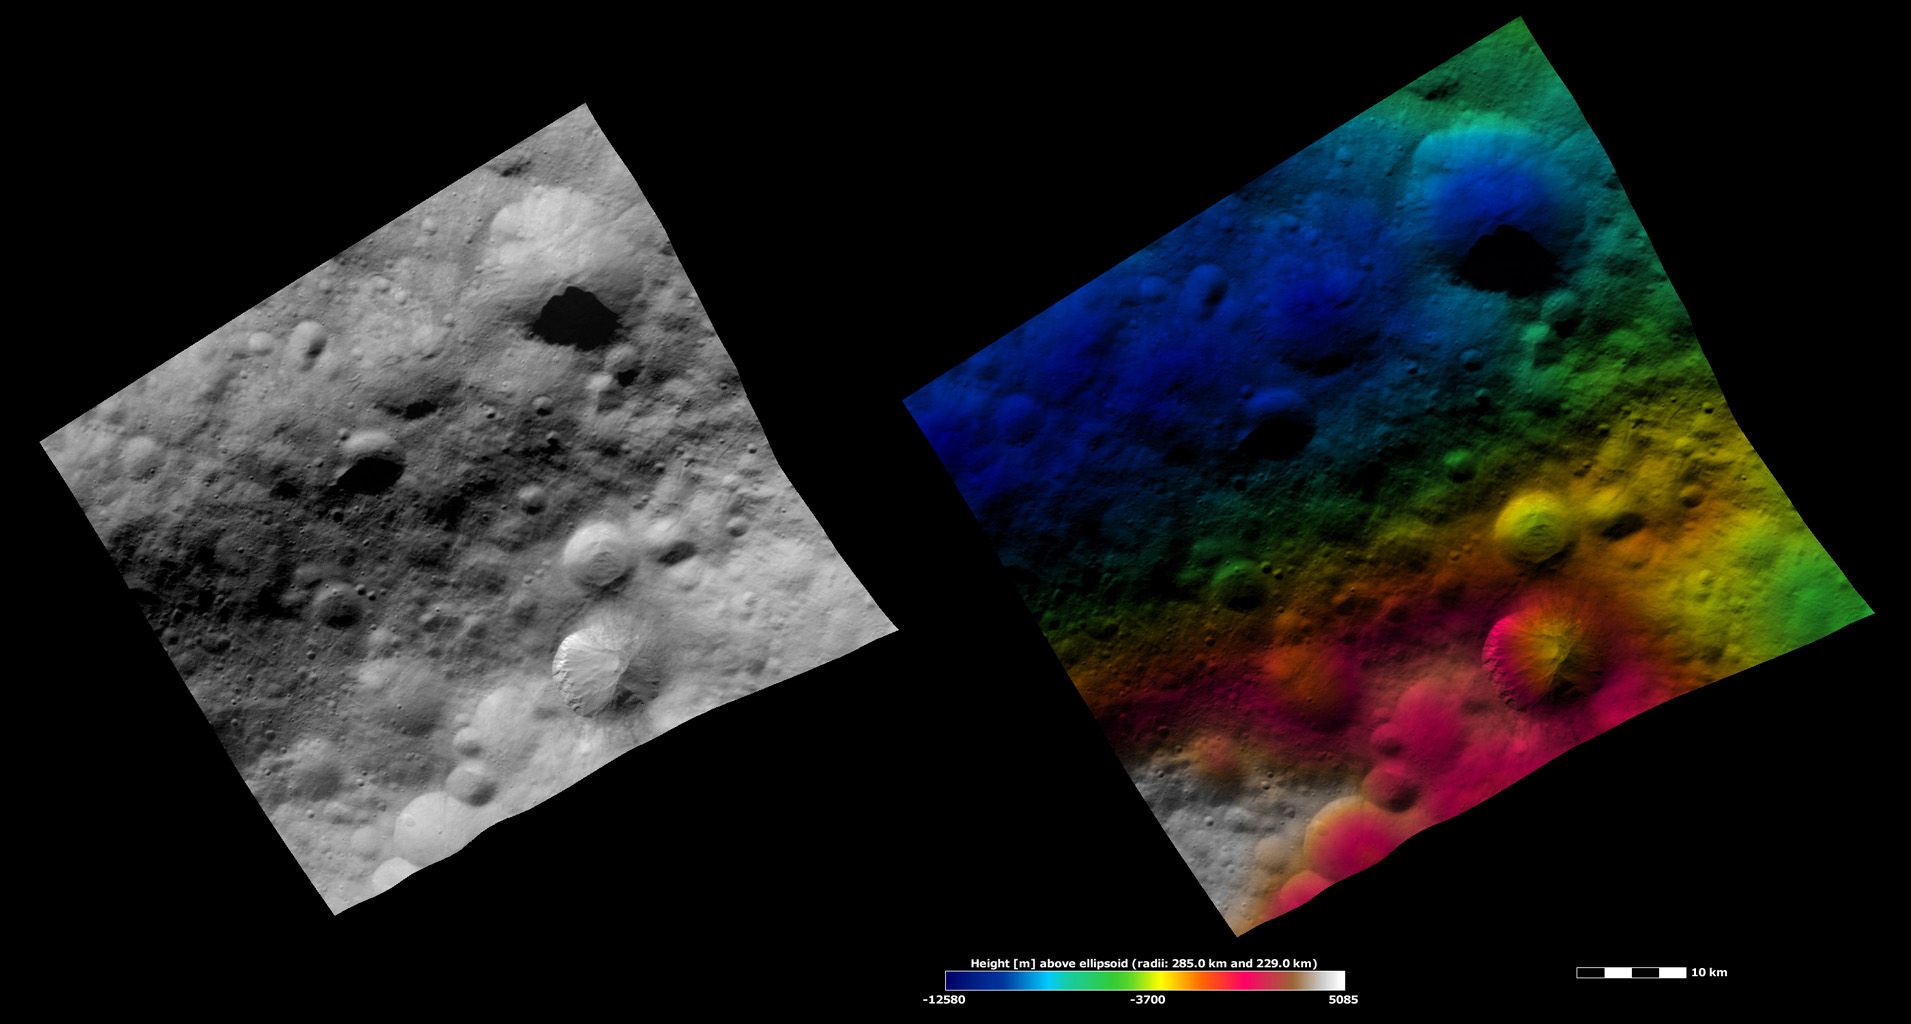 Apparent Brightness and Topography Images of Fabia Crater